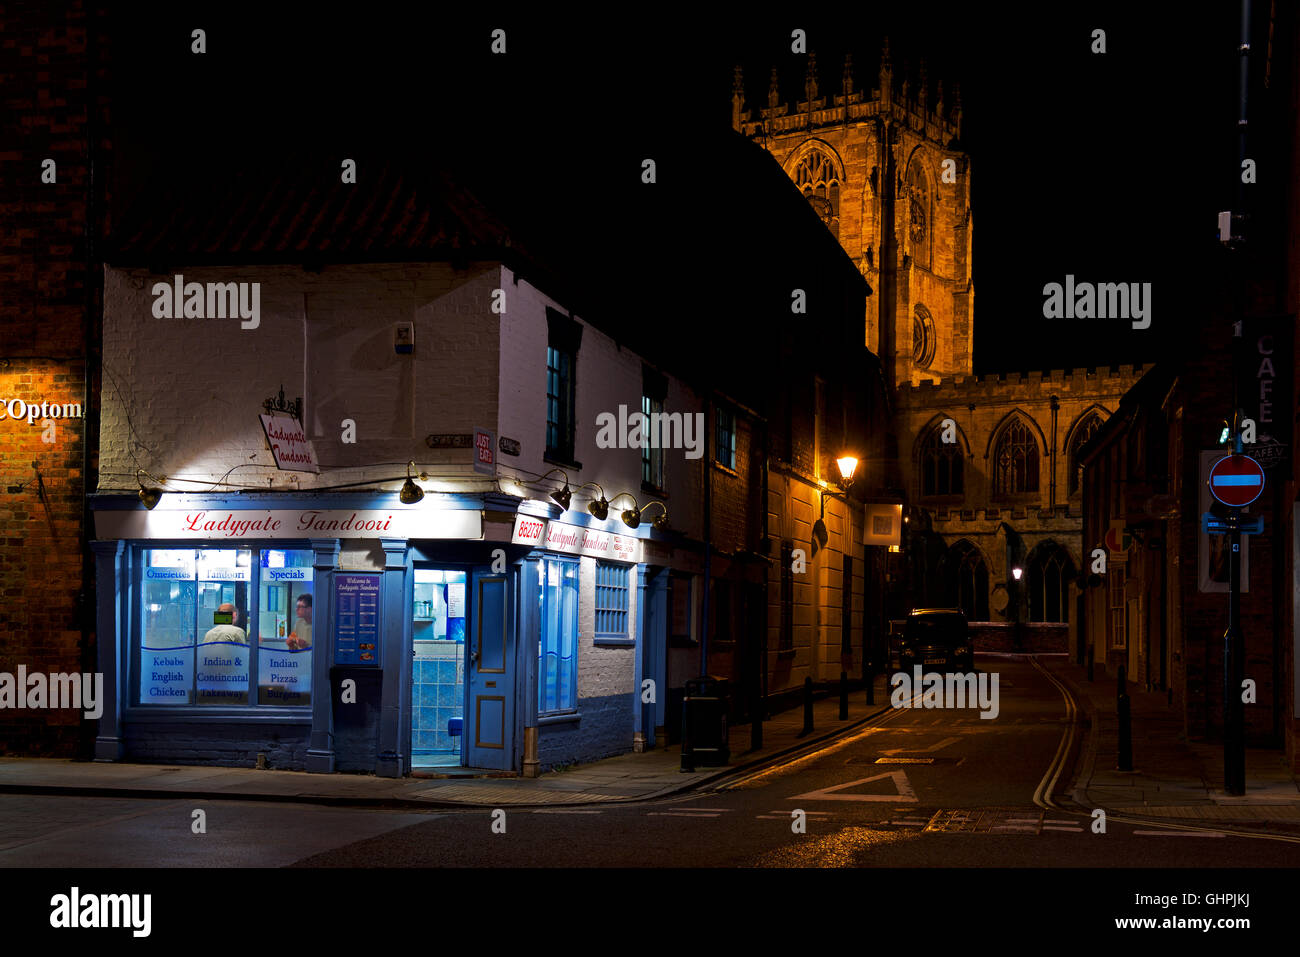 Curry take-away and St Mary's church, at night, Beverley, East Yorkshire, England UK Stock Photo